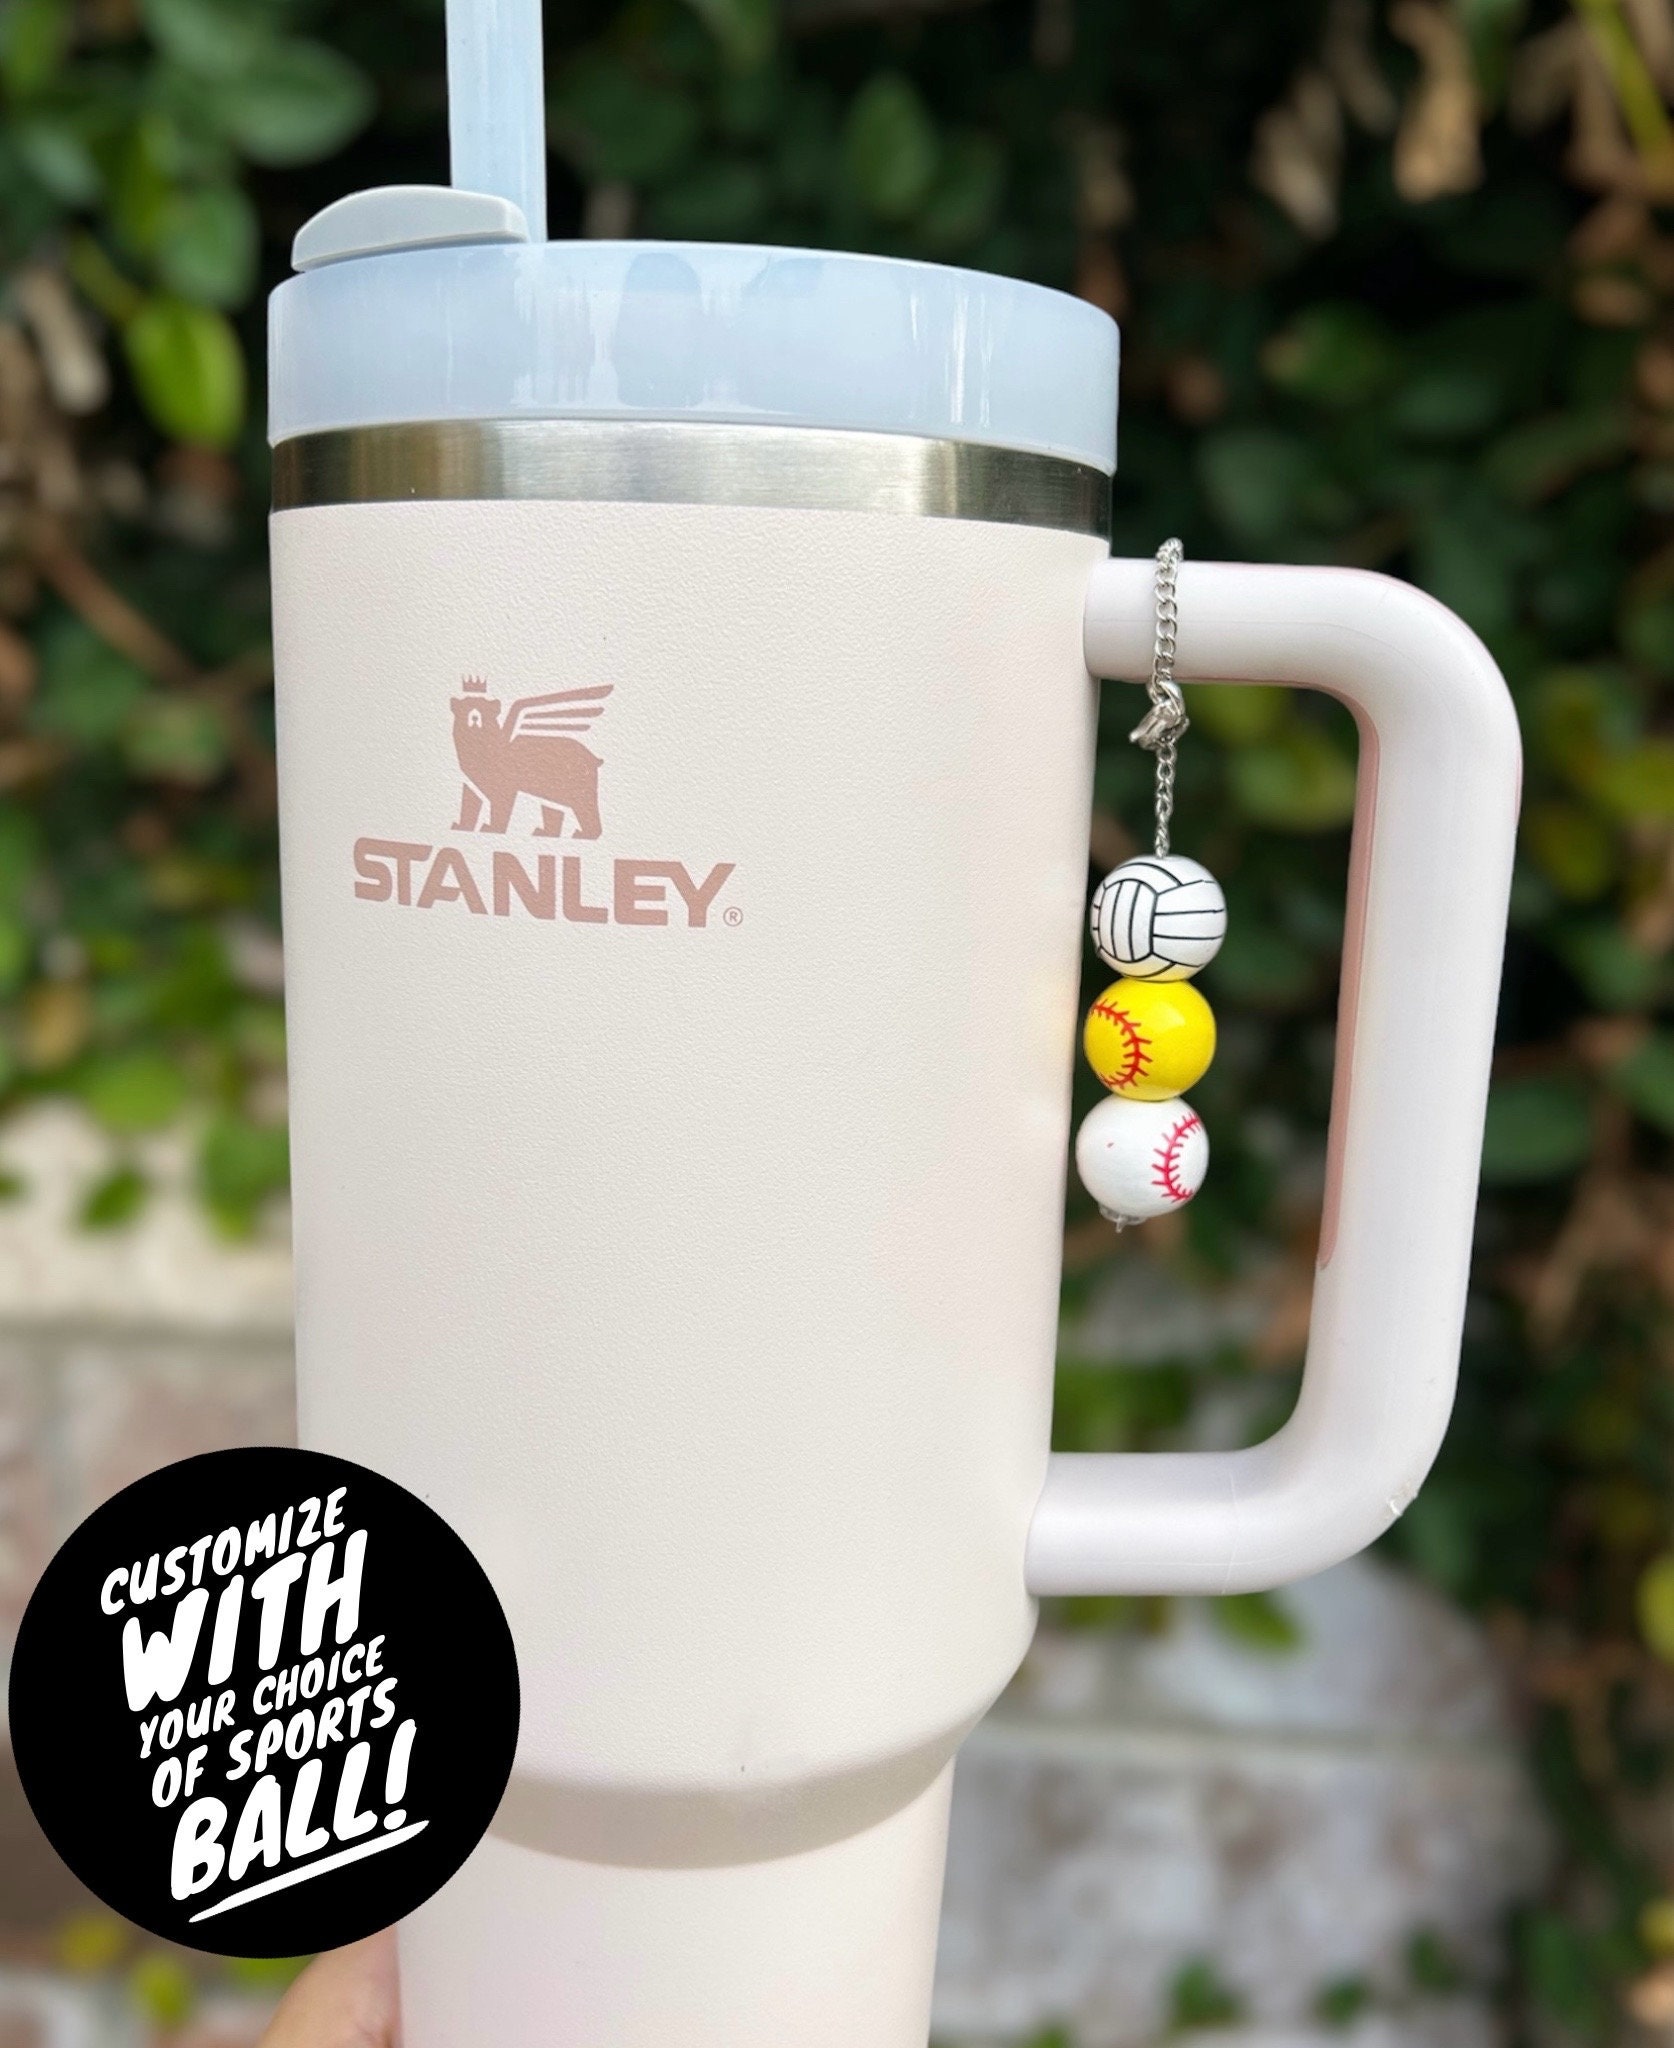  Compatible with Christmas Stanley Cup Accessories for Stanley  30 40oz Tumbler, Stanley Accessories Includes 10mm Stanley Straw Cover,  Stanley Boot and Merry Christmas Stickers (2 Pack): Home & Kitchen